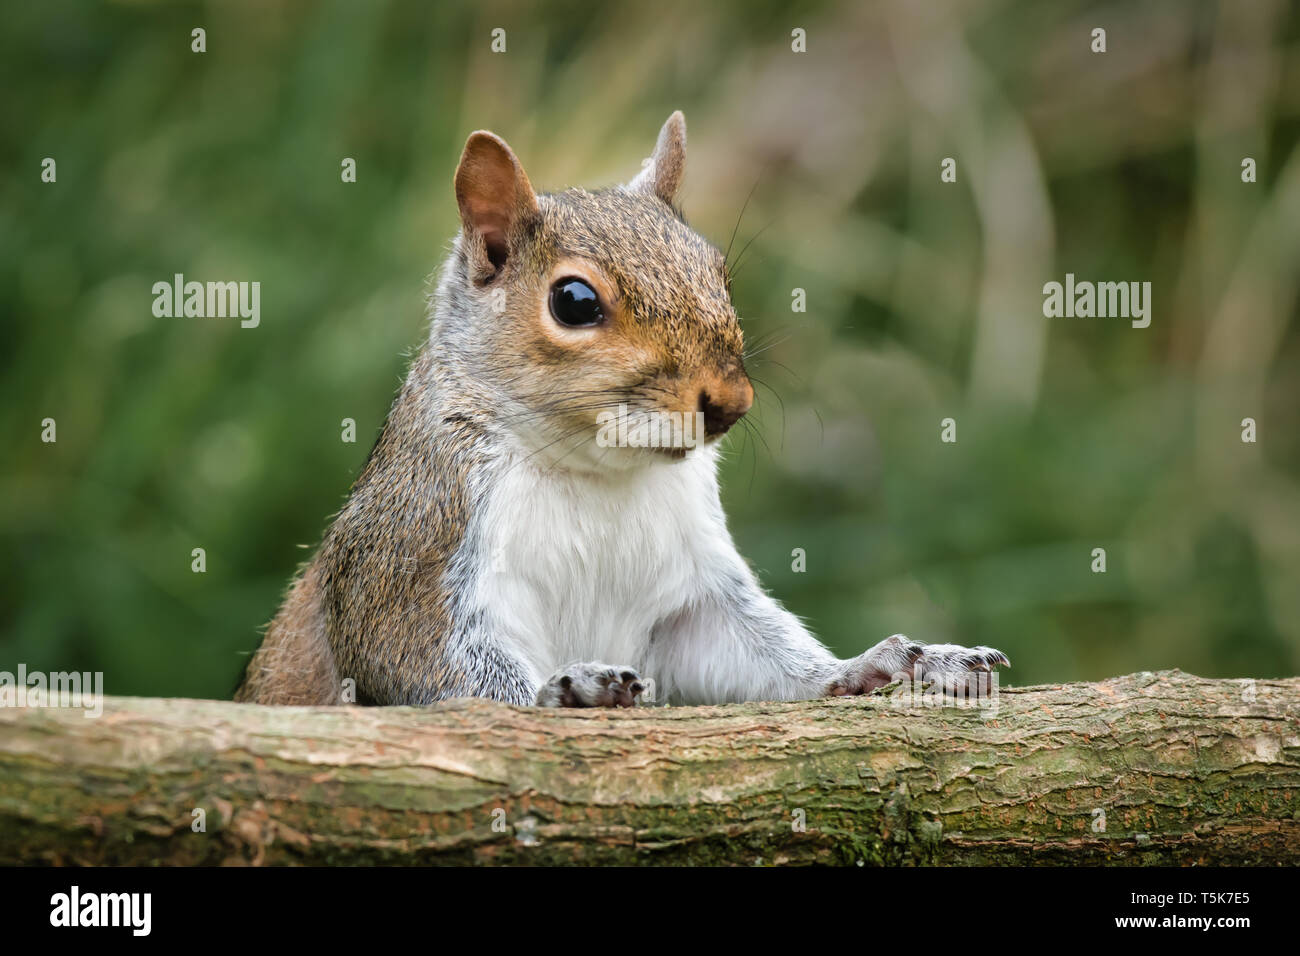 A close up of the head and shoulders of a grey gray squirrel as it tried to climb over an old log Stock Photo